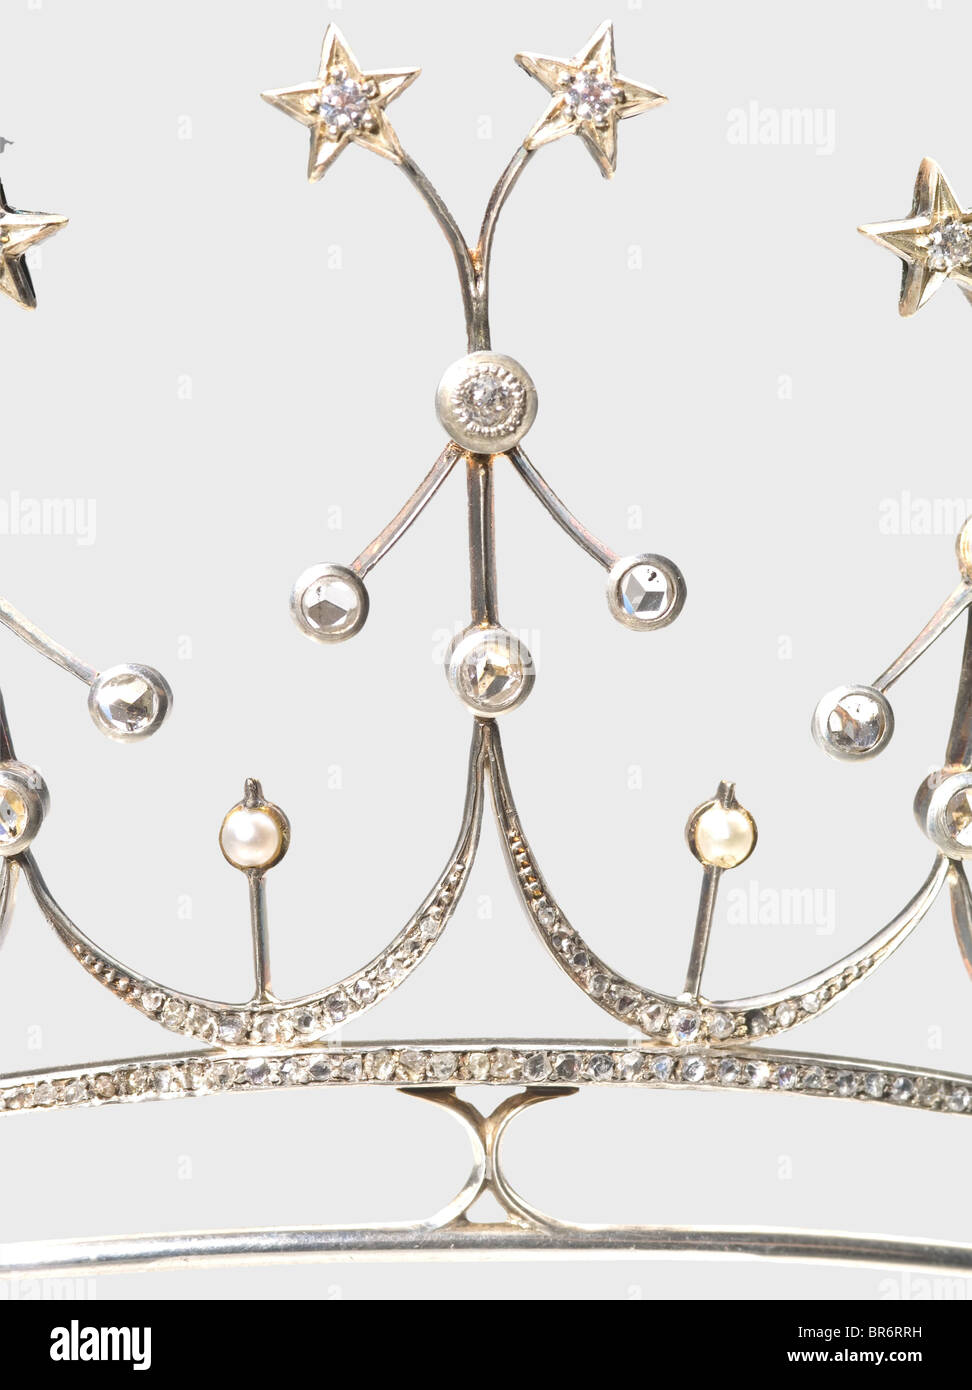 A star diadem, end of the 19th century. Rose gold, silver, old-cut diamonds, diamond chips and ten orient pearls. Filigree work, surmounted by ten diamonds set in star-shaped frames. Weight 30 g. In a case lined with velvet and silk, with gold-stamped jeweller's name 'Peter Rath Juwelier - kgl. Hoflieferant München' (Peter Rath Jeweller - Purveyor to the Royal Court, Munich). It is said that this diadem originates from the posessions of the Barons of Würtzburg. This family is extinct in the male line since the death of Colonel Ludwig Veit of Würtzburg. He died , Stock Photo